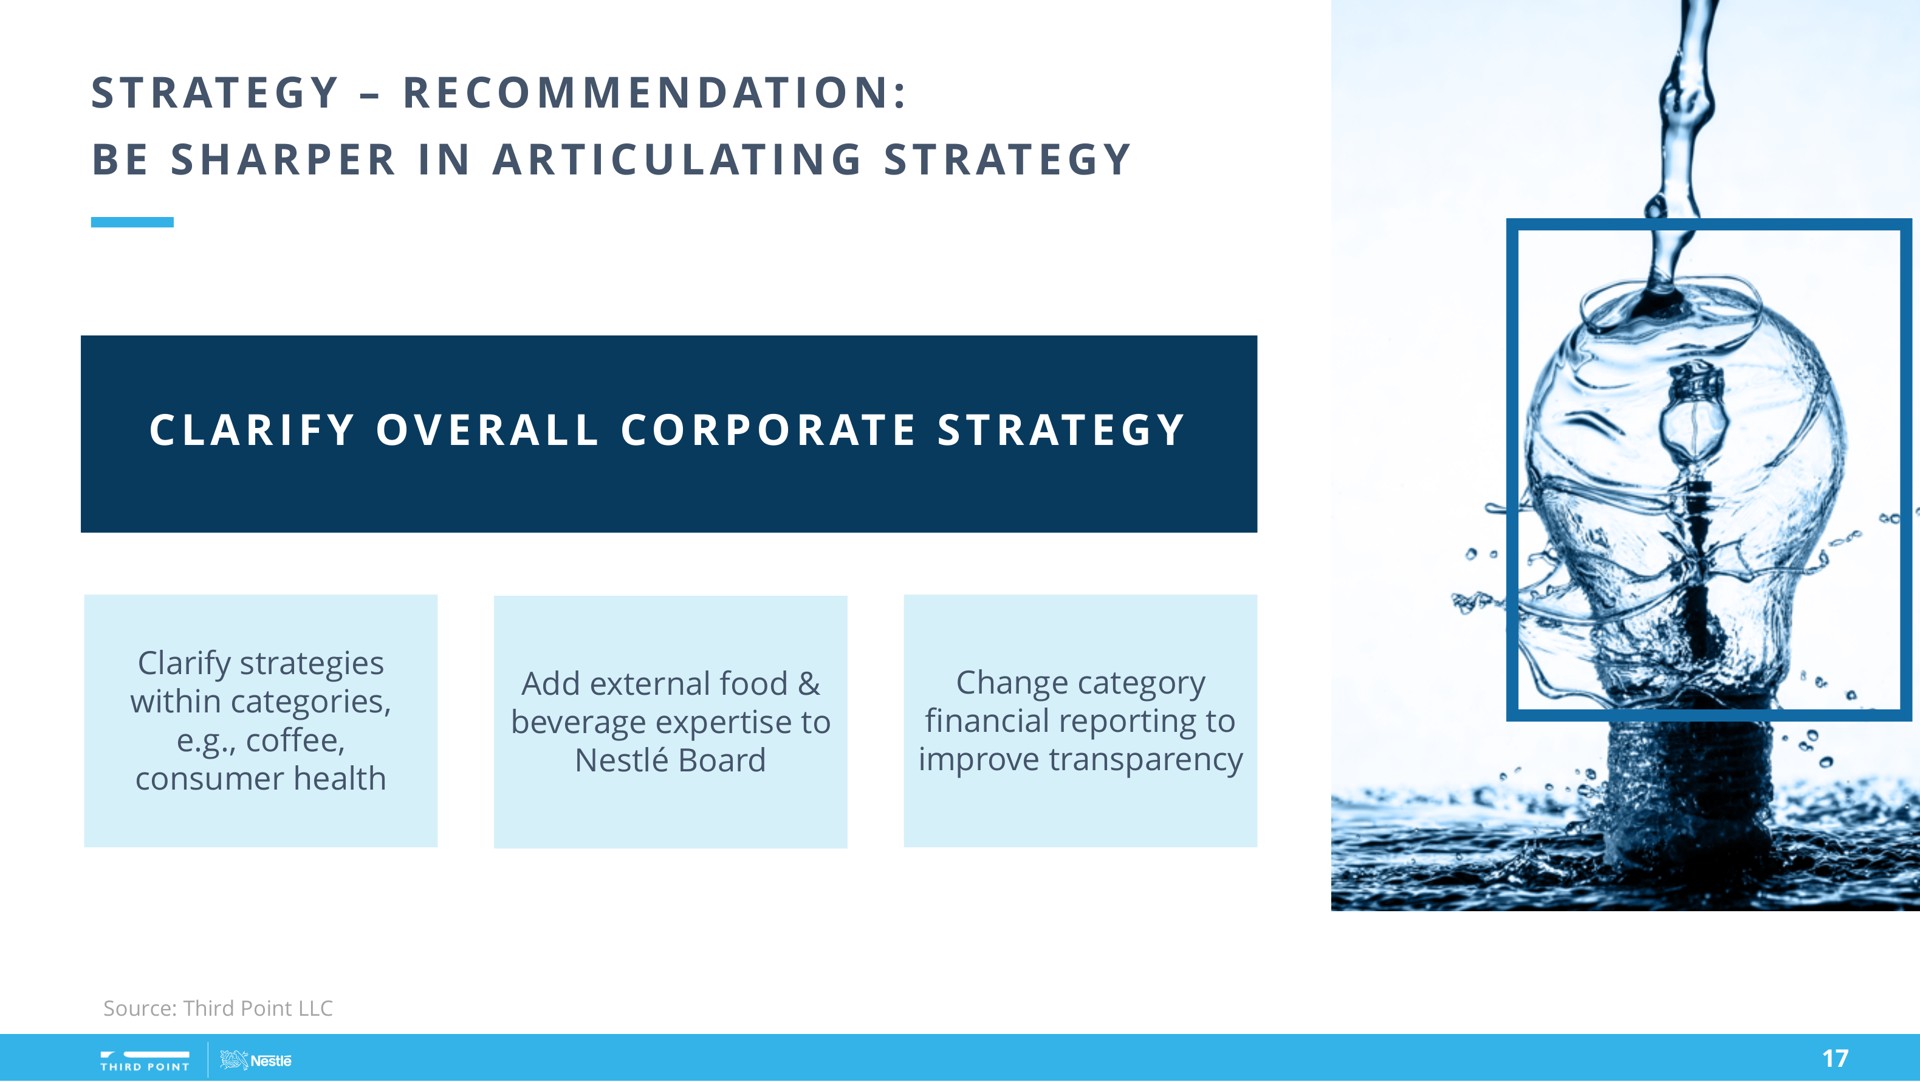 at at i a i a i at i at a i a at at strategy recommendation be sharper in articulating strategy clarify overall corporate strategy | Third Point Management